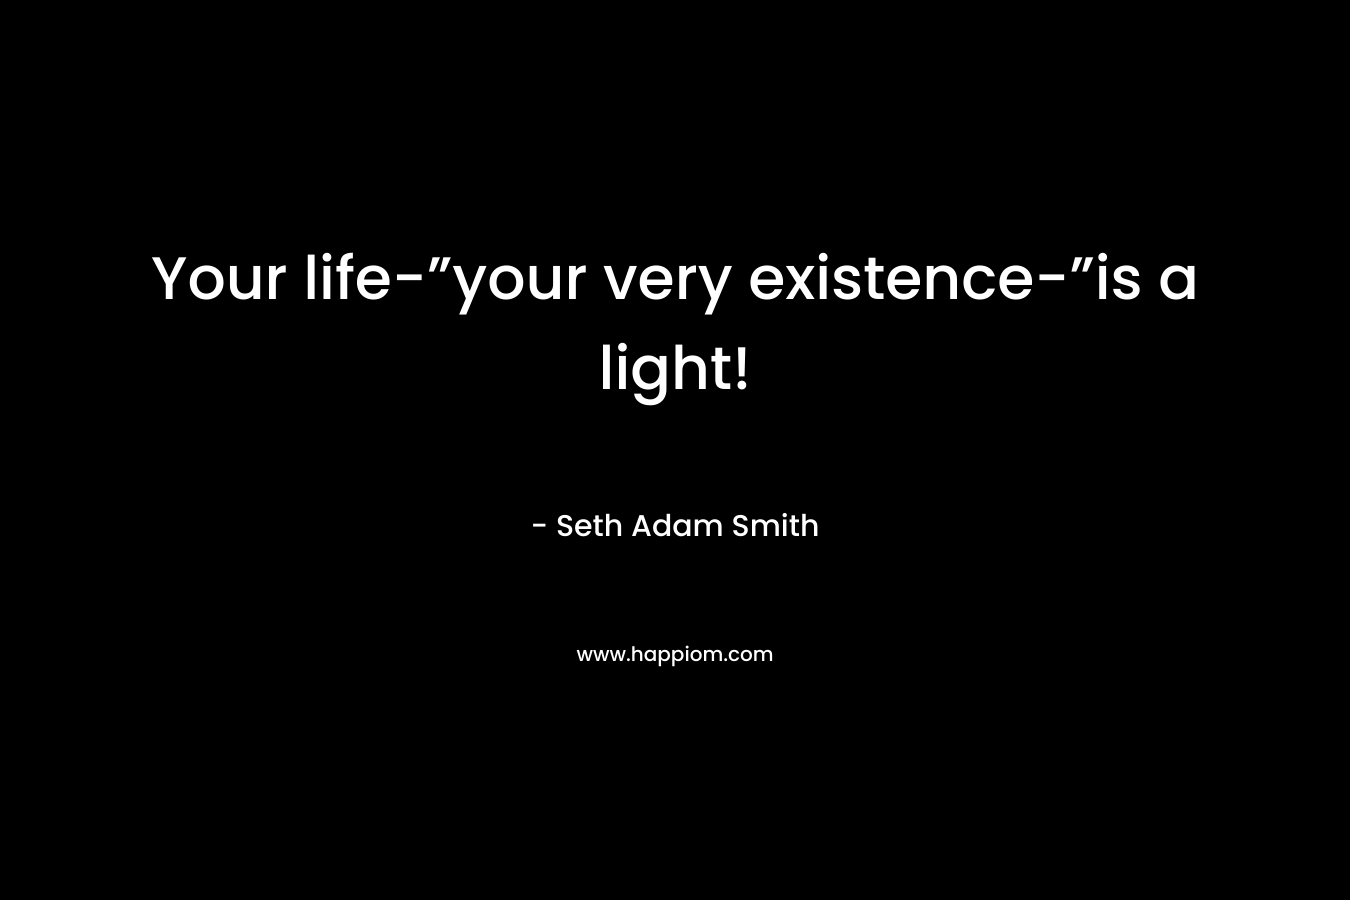 Your life-”your very existence-”is a light!